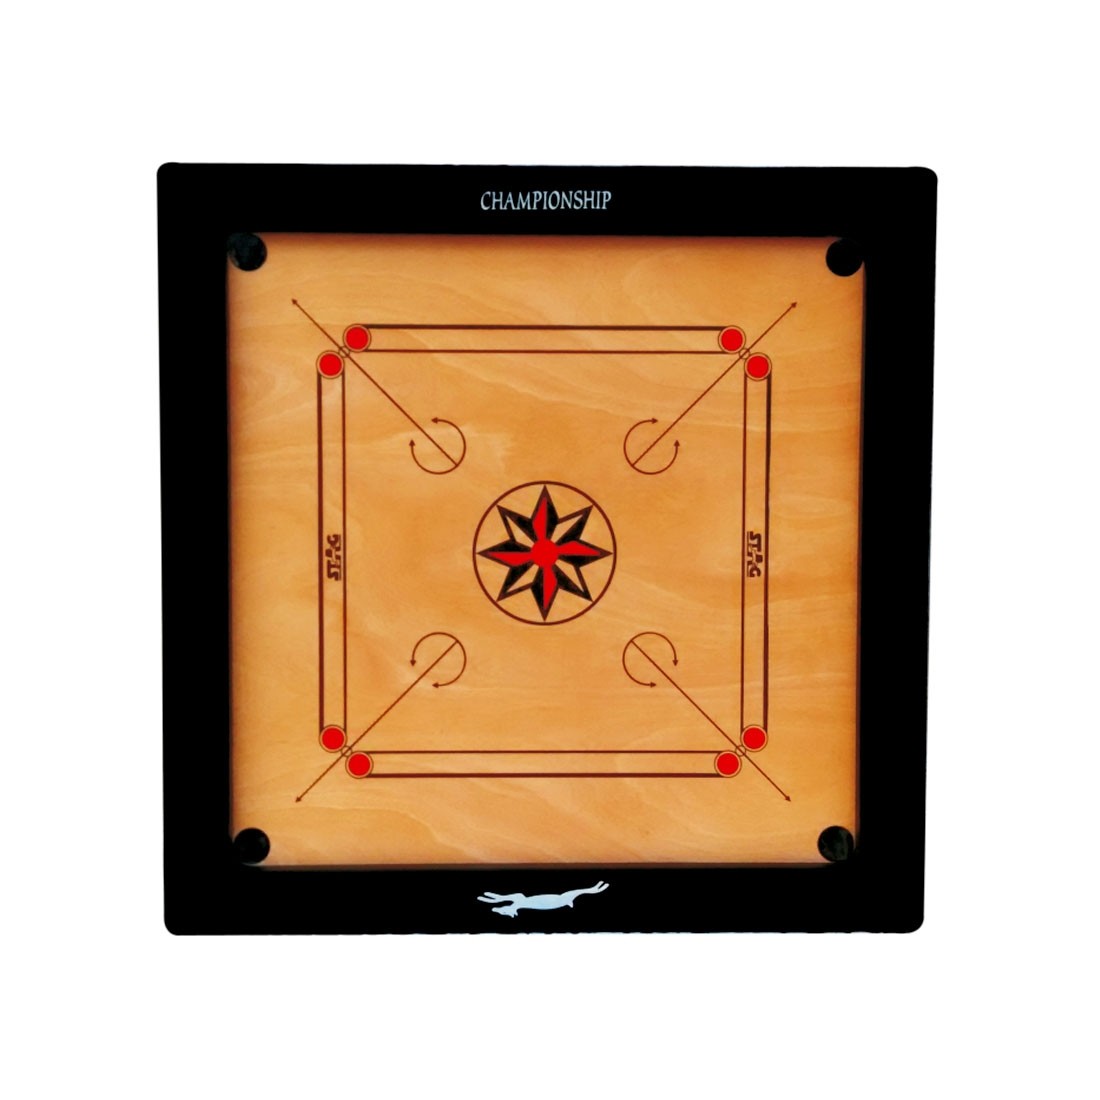 STAG CARROM BOARD CHAMPIONSHIP 3" BORDER 12MM M.D.F. WITH LOW STAND